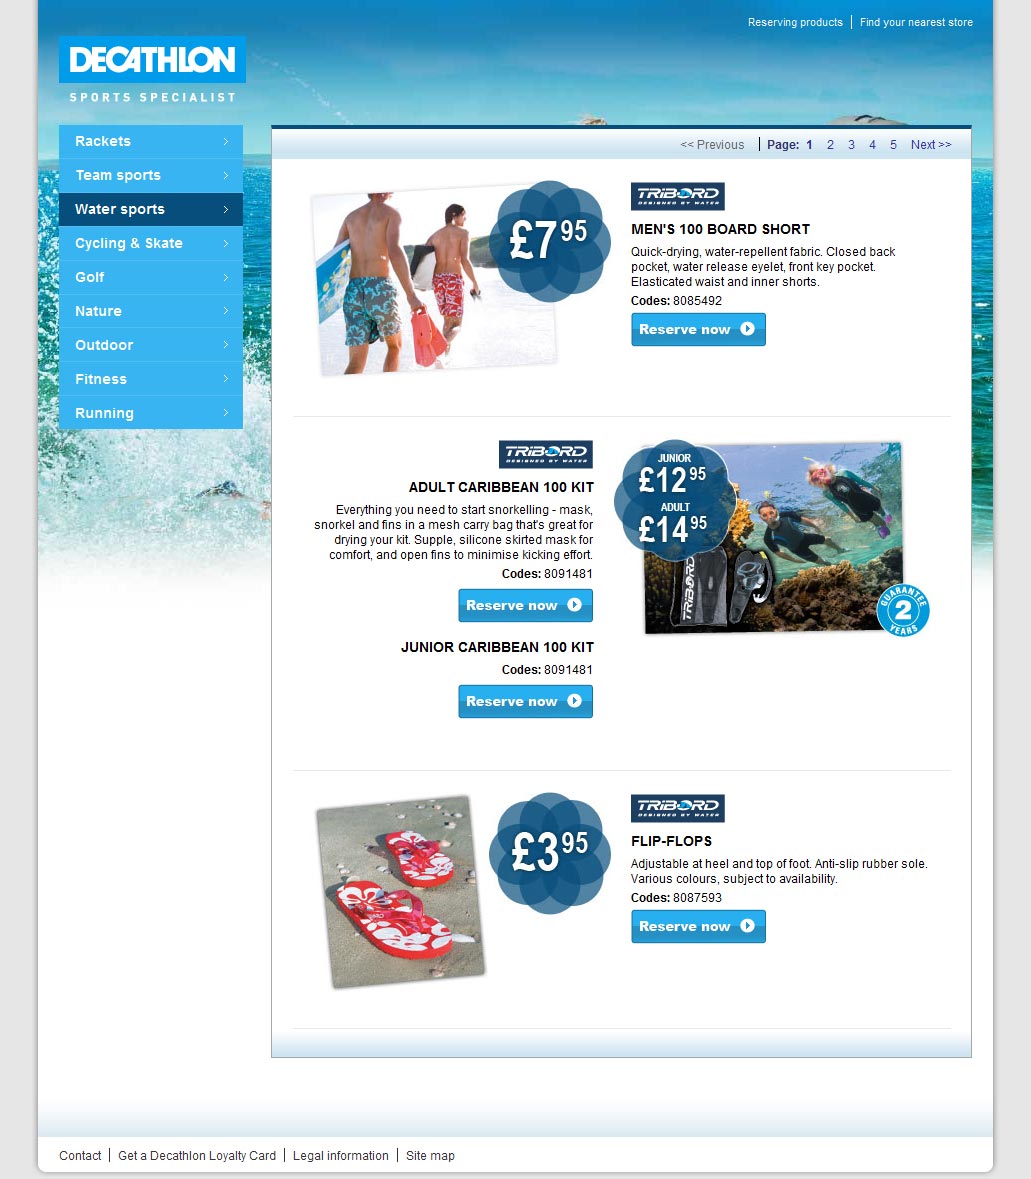 Decathlon microsite water category image.